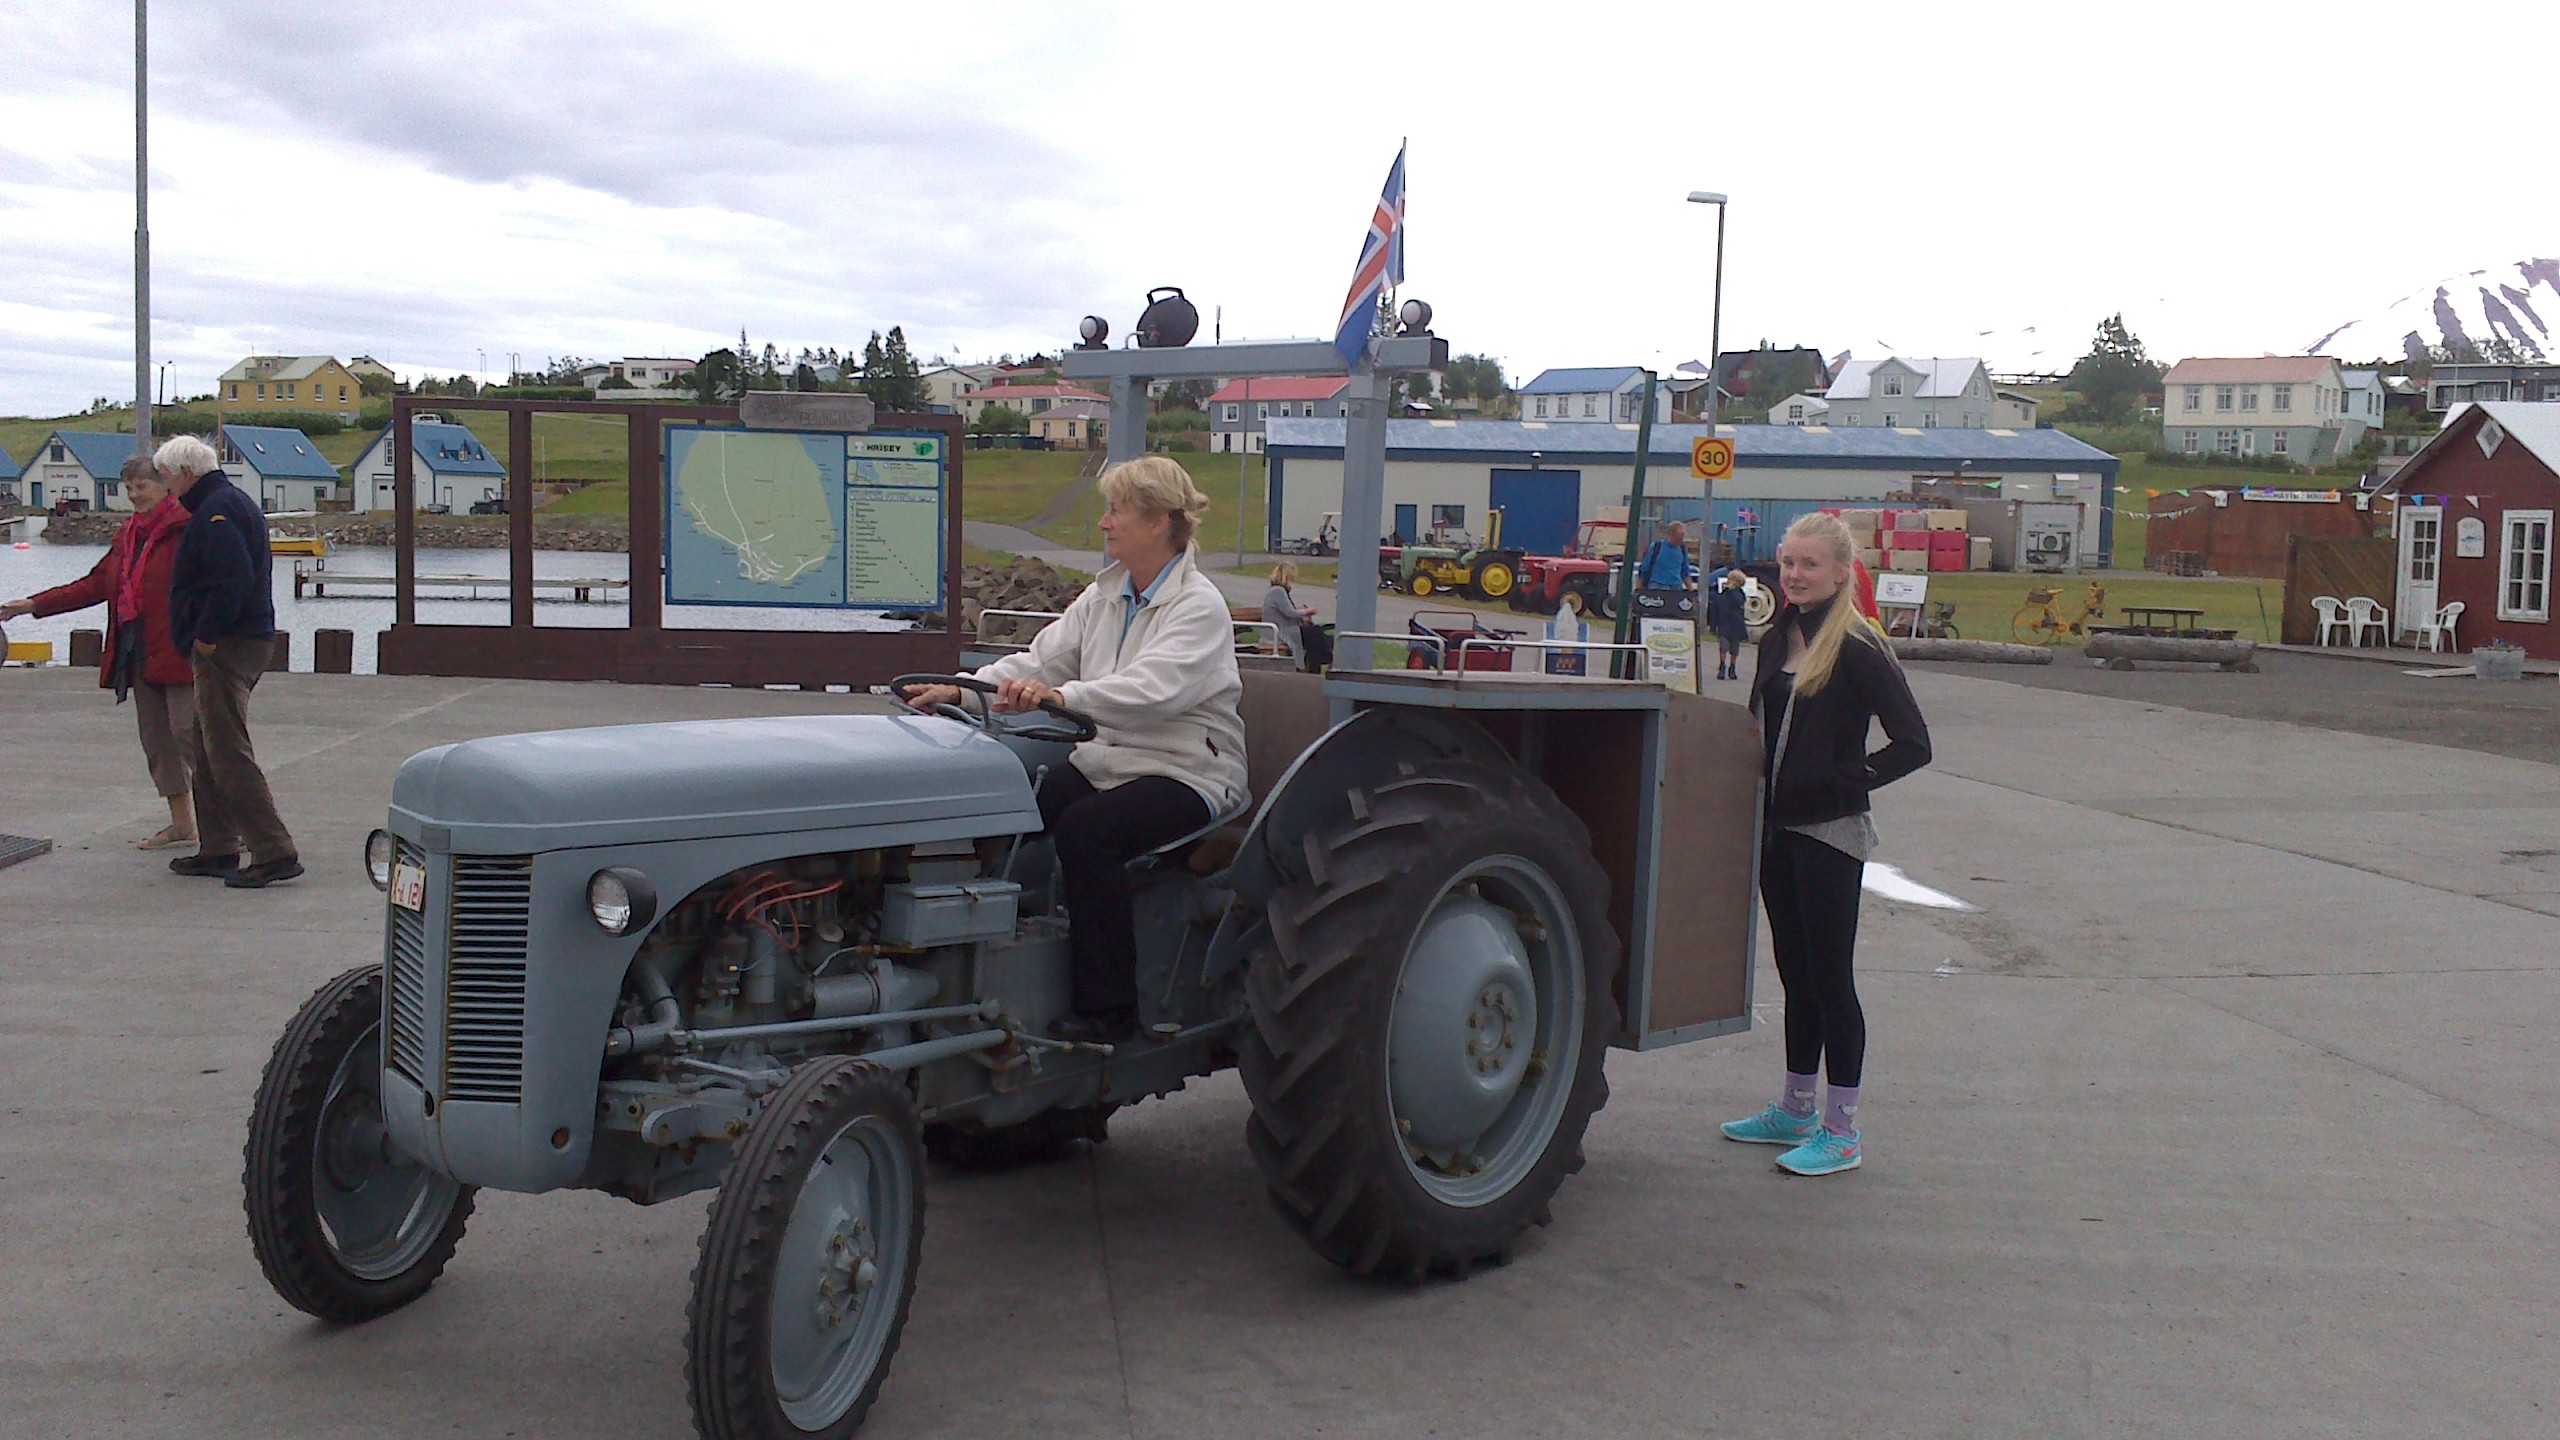 Take a tractor ride on Hrísey Island and get to know the friendly locals.